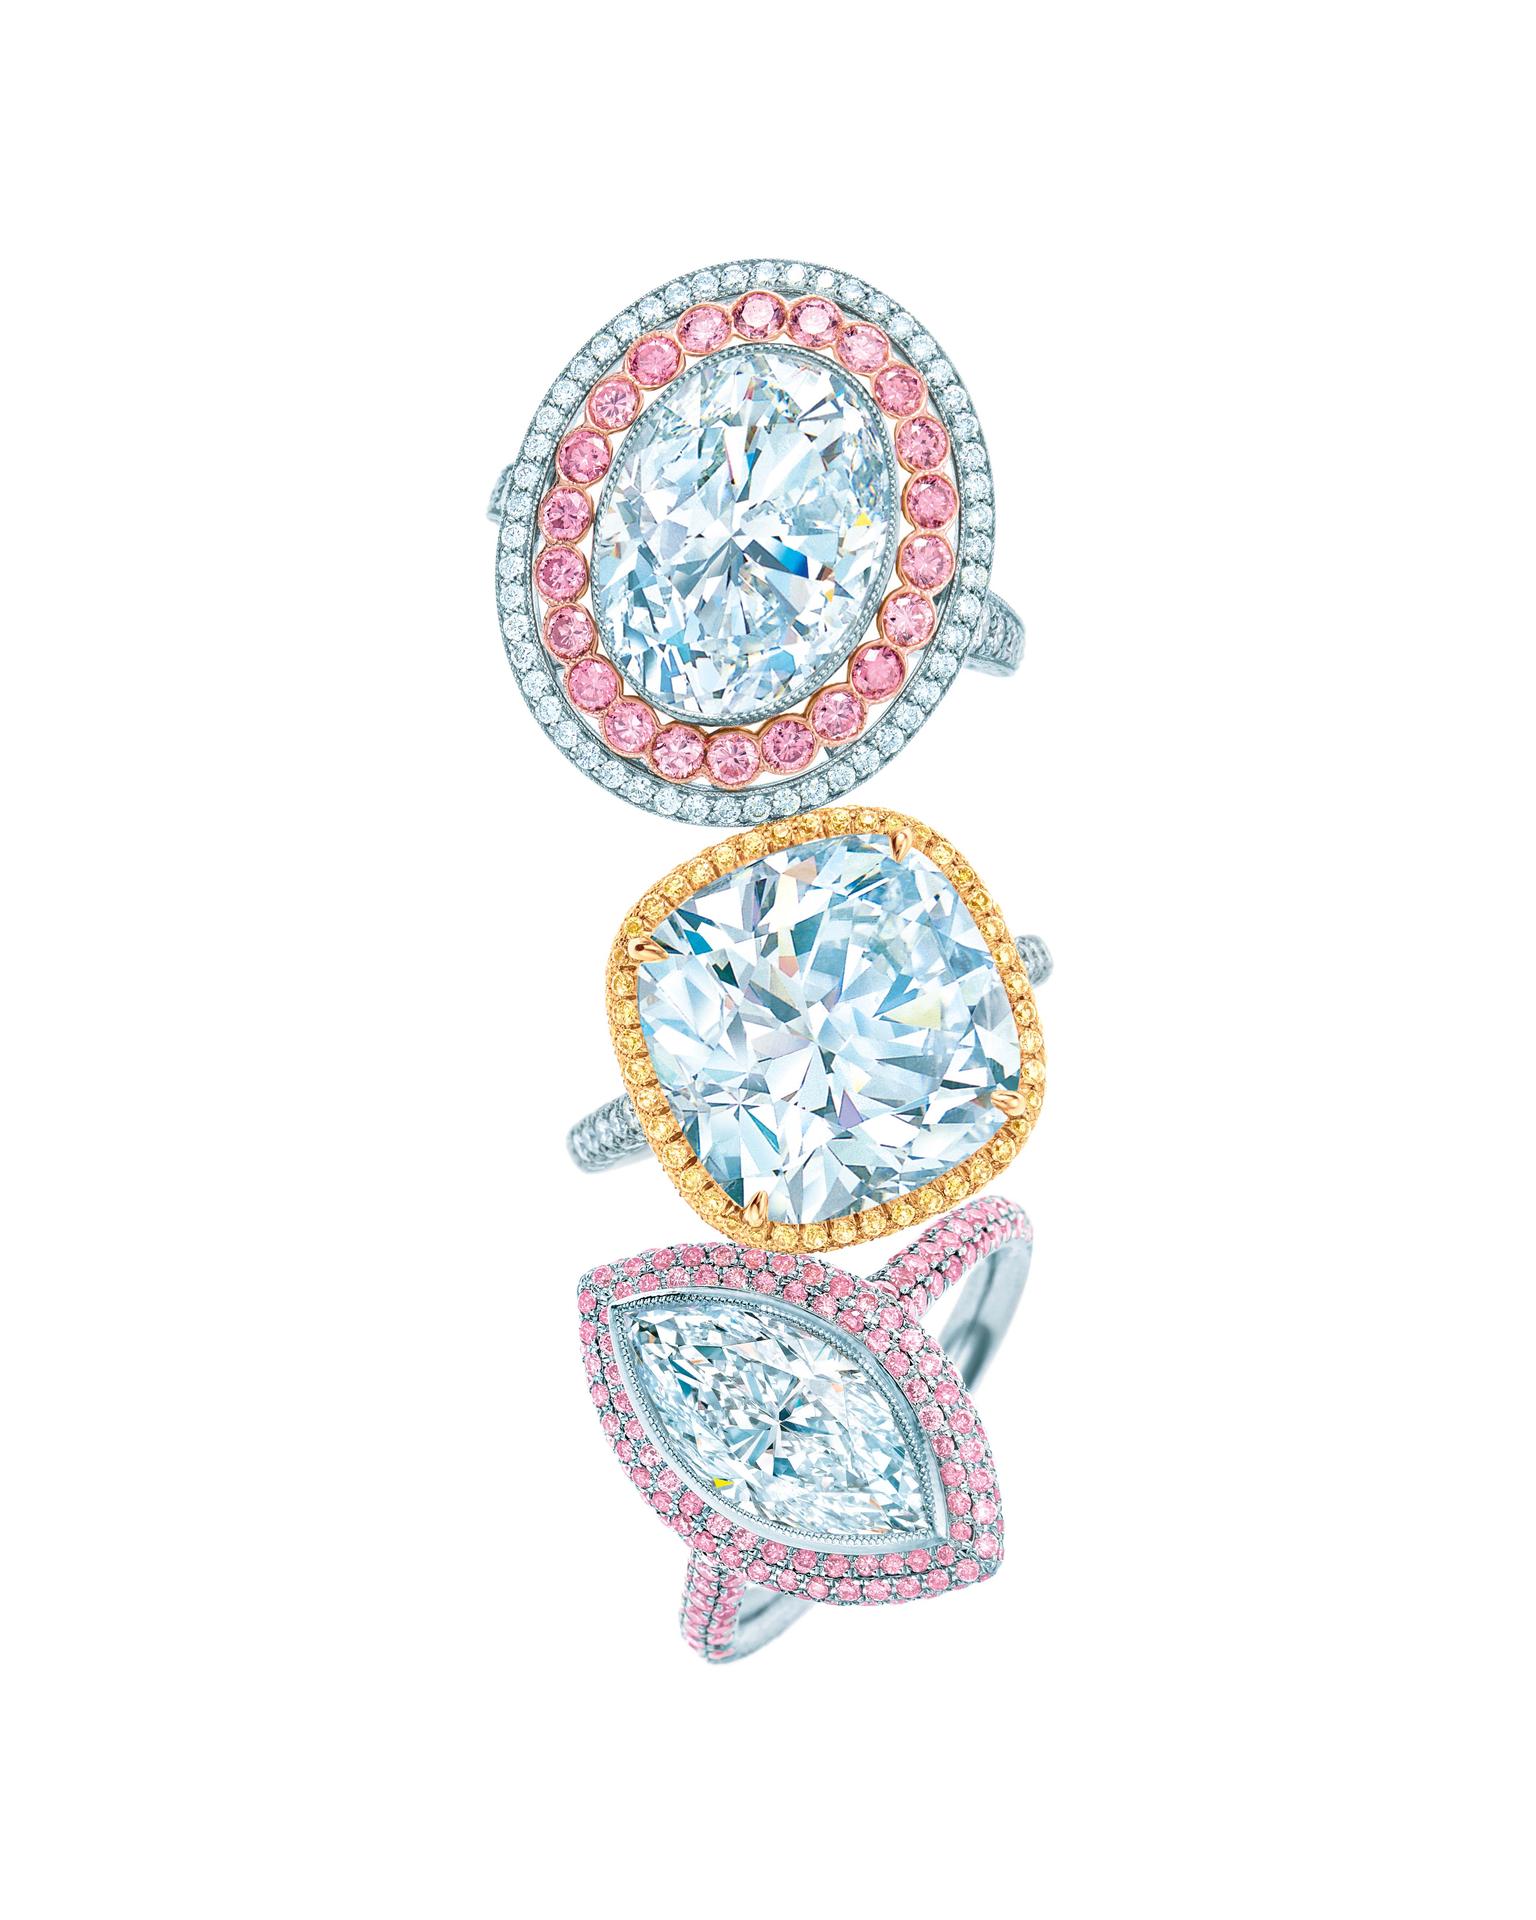 Top to bottom, Tiffany & Co. Blue Book Collection Fancy Vivid pink diamond ring with diamonds set in platinum; 10.17ct diamond ring set in platinum and gold; and white and Fancy Vivid pink diamond ring set in platinum